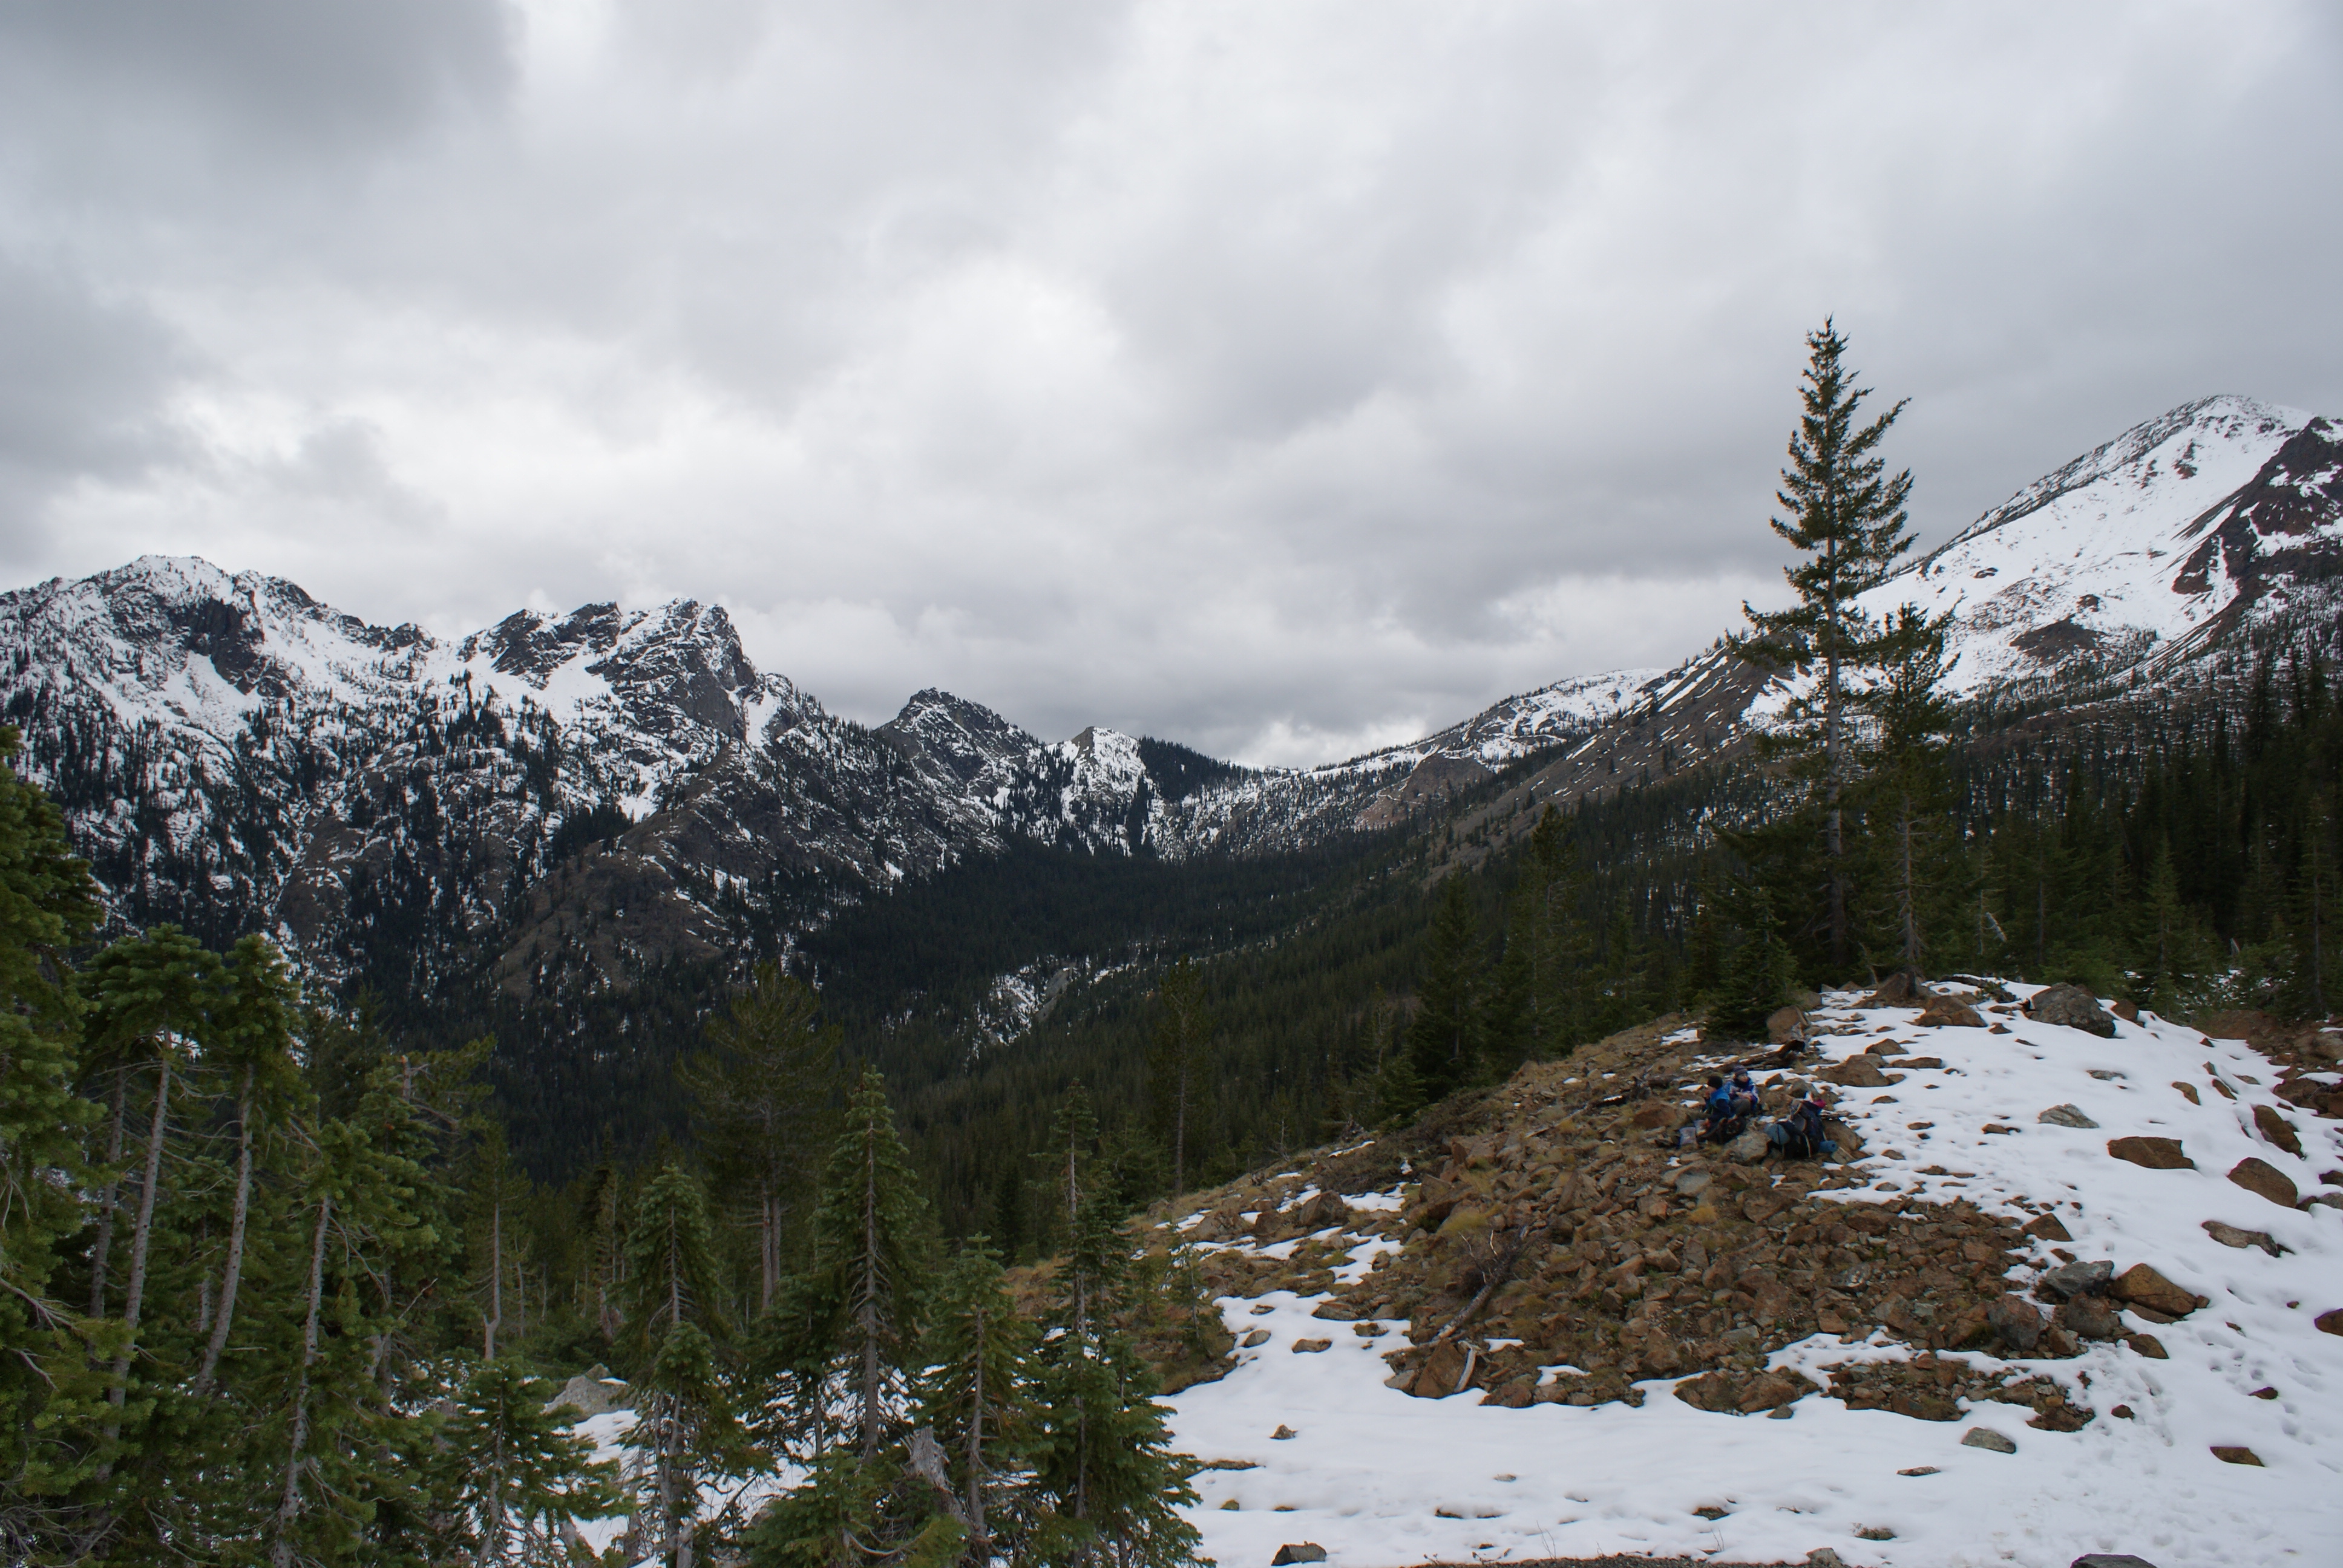 longs pass, ingalls lake trail, hiking with children, fall hikes, larches